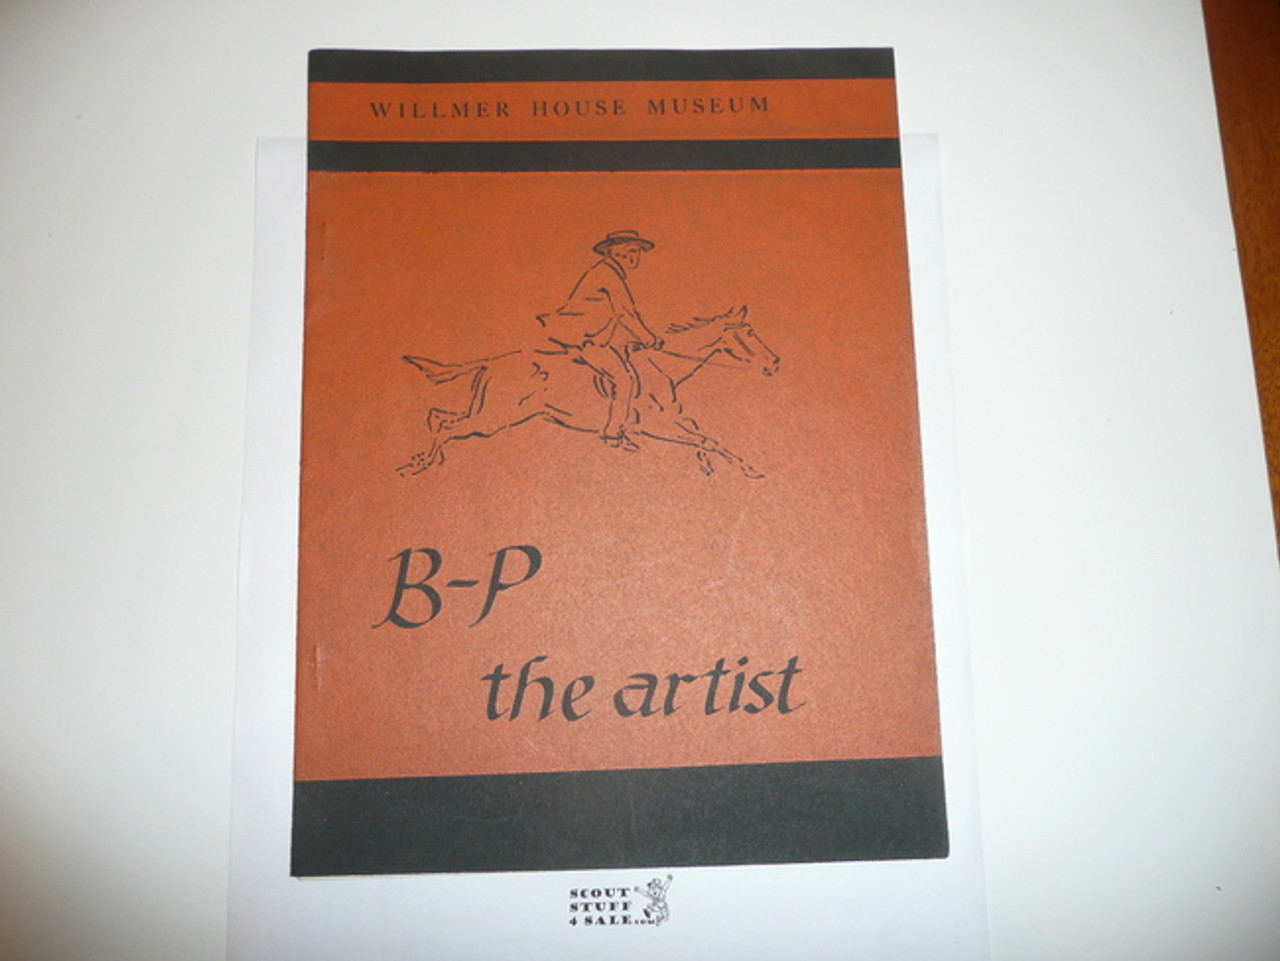 1967 Program From the Willmer House Museum For a Show of Baden Powell's Artwork